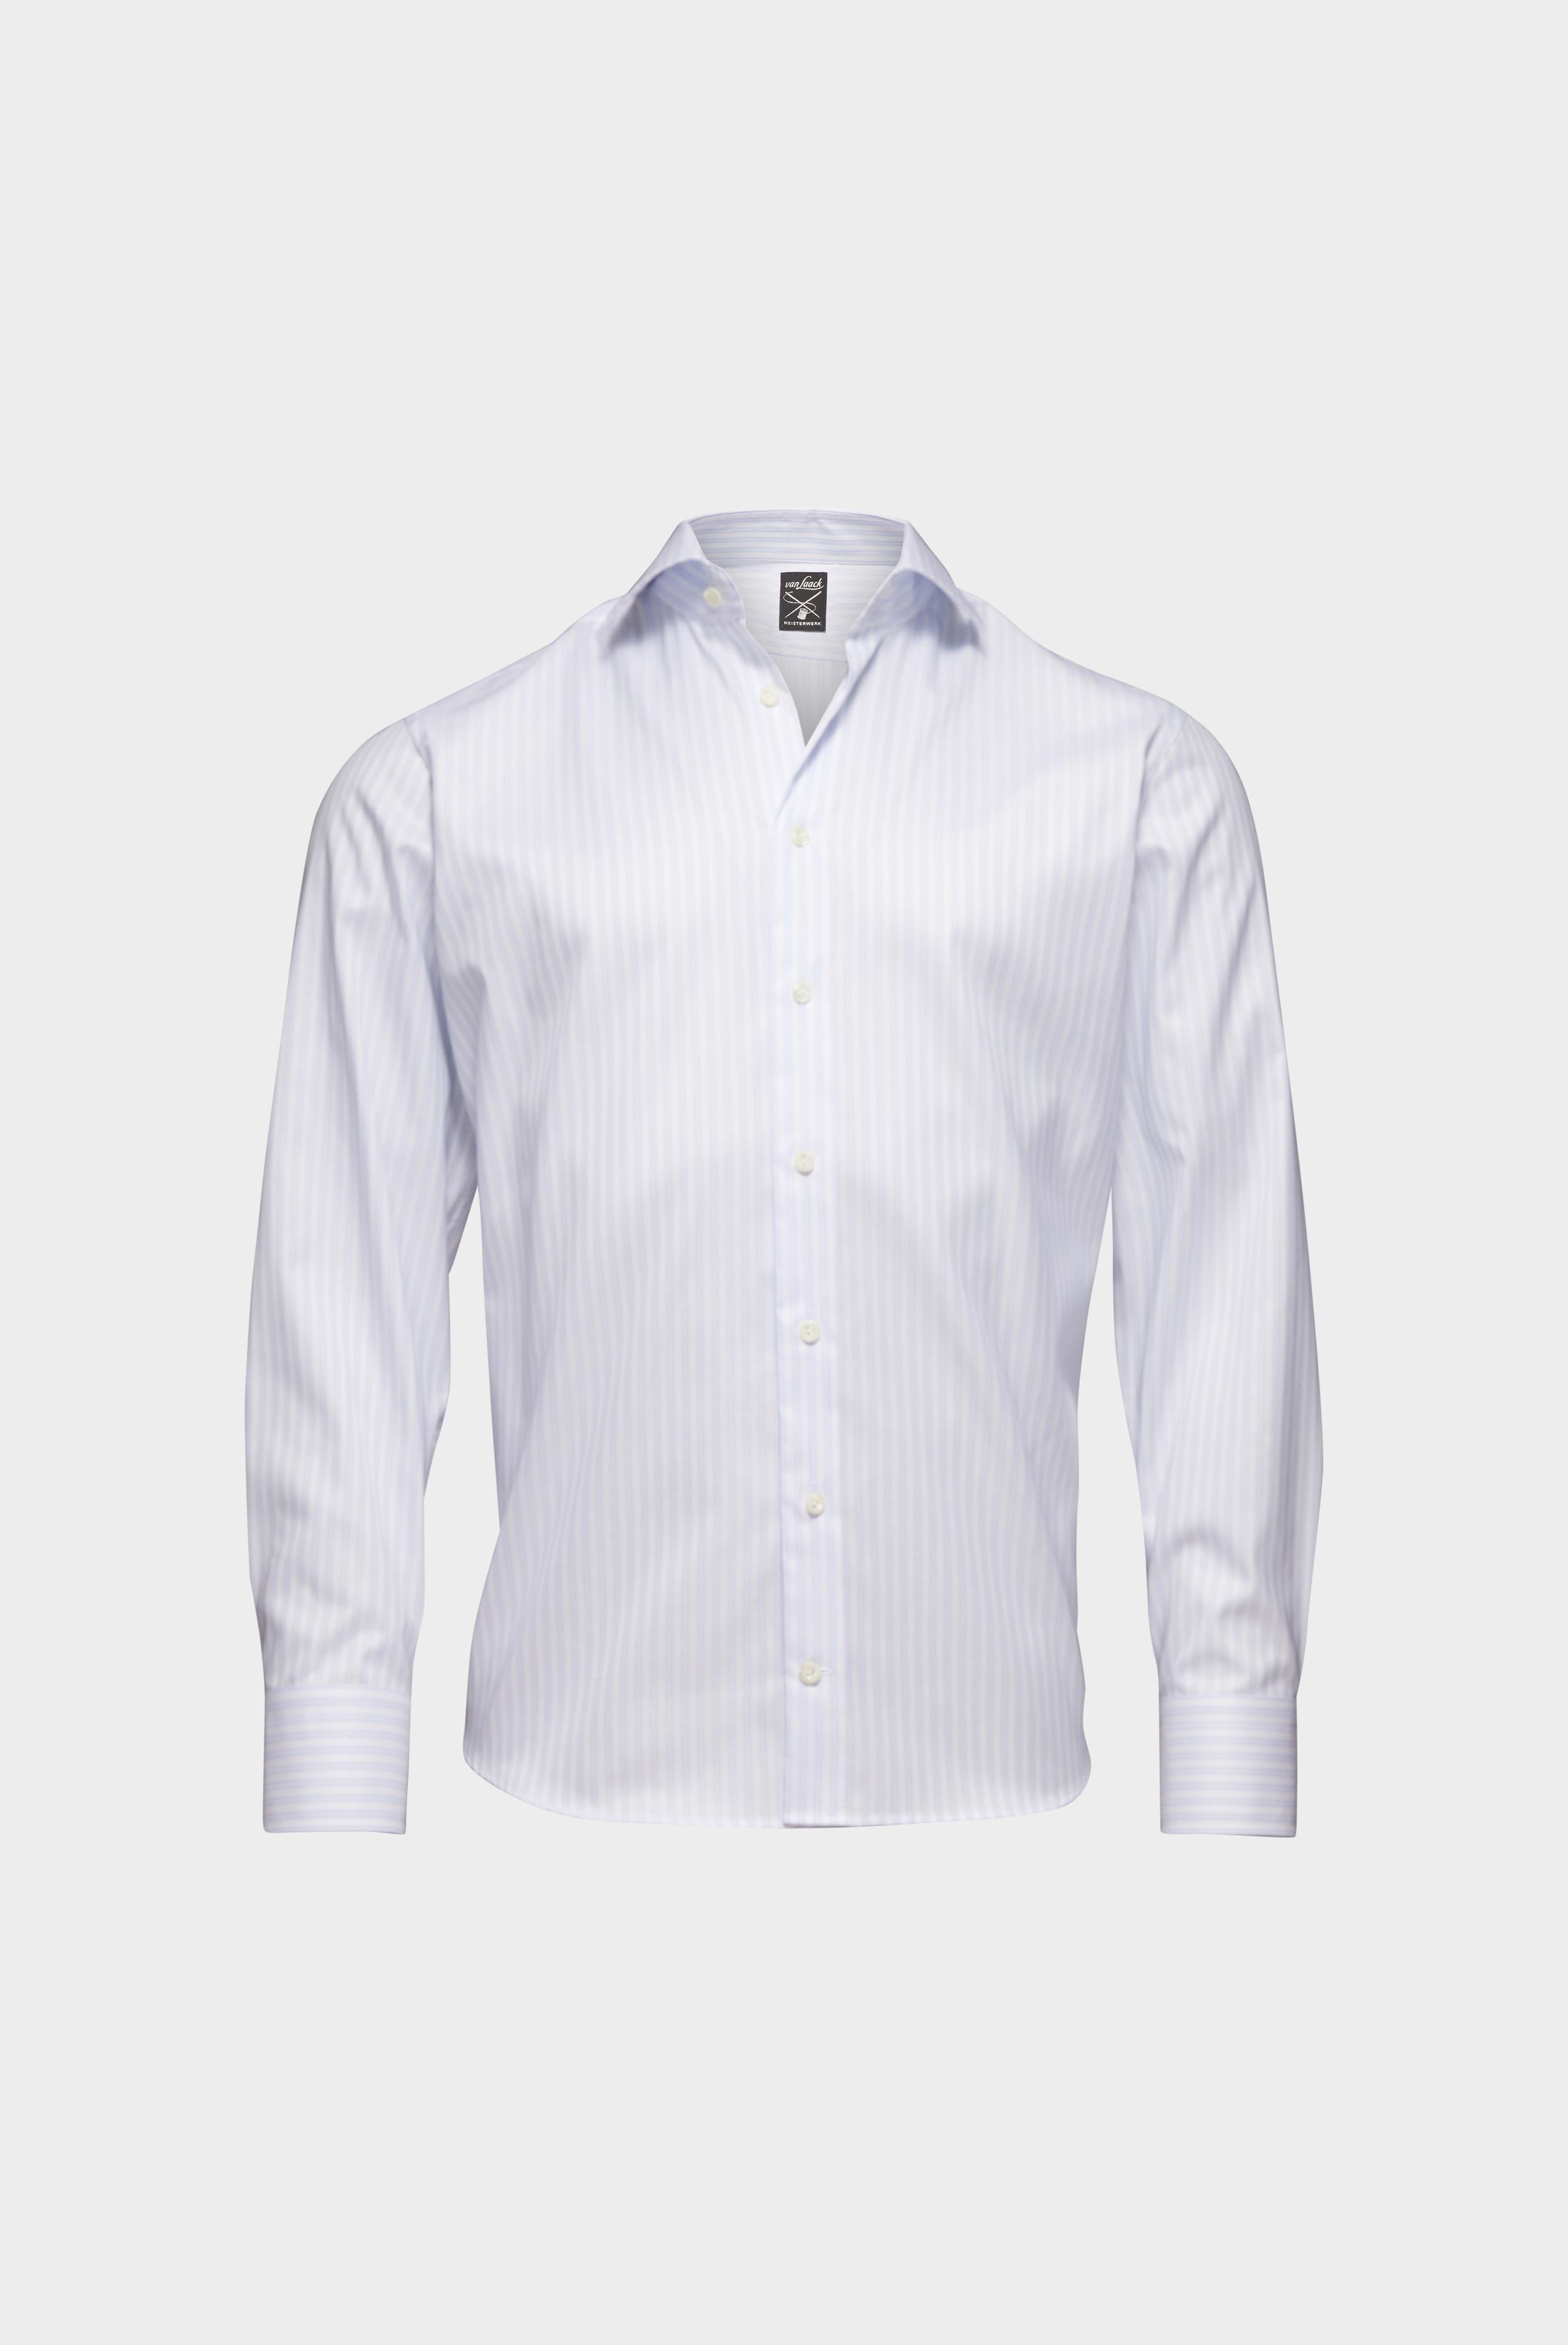 Easy Iron Shirts+Striped Wrinkle Free Shirt Tailor Fit+20.2020.BQ.161106.007.39